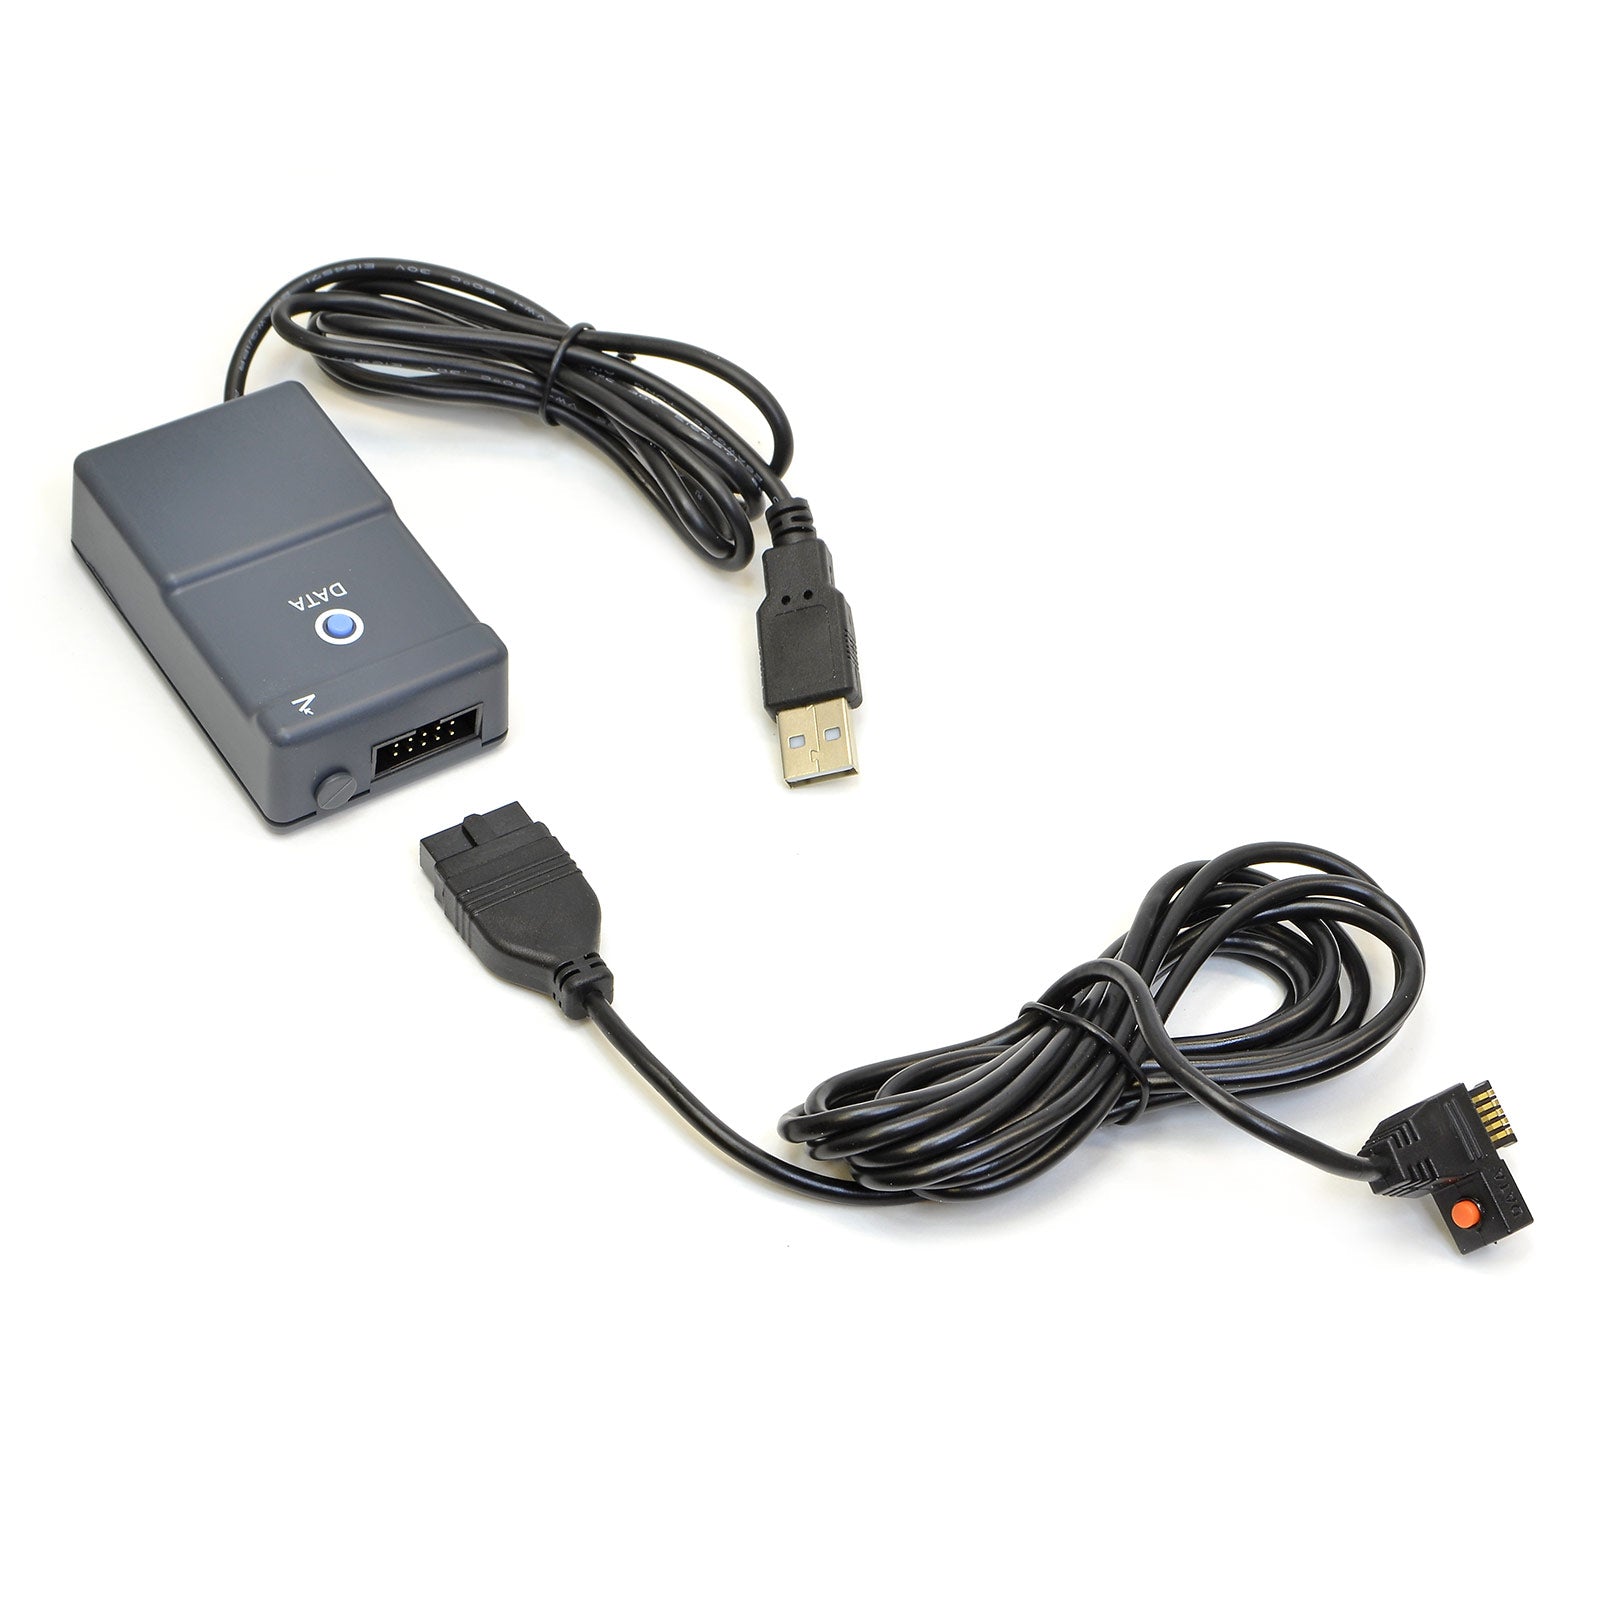 USB Interface and Cable for Digital Readouts by iGaging